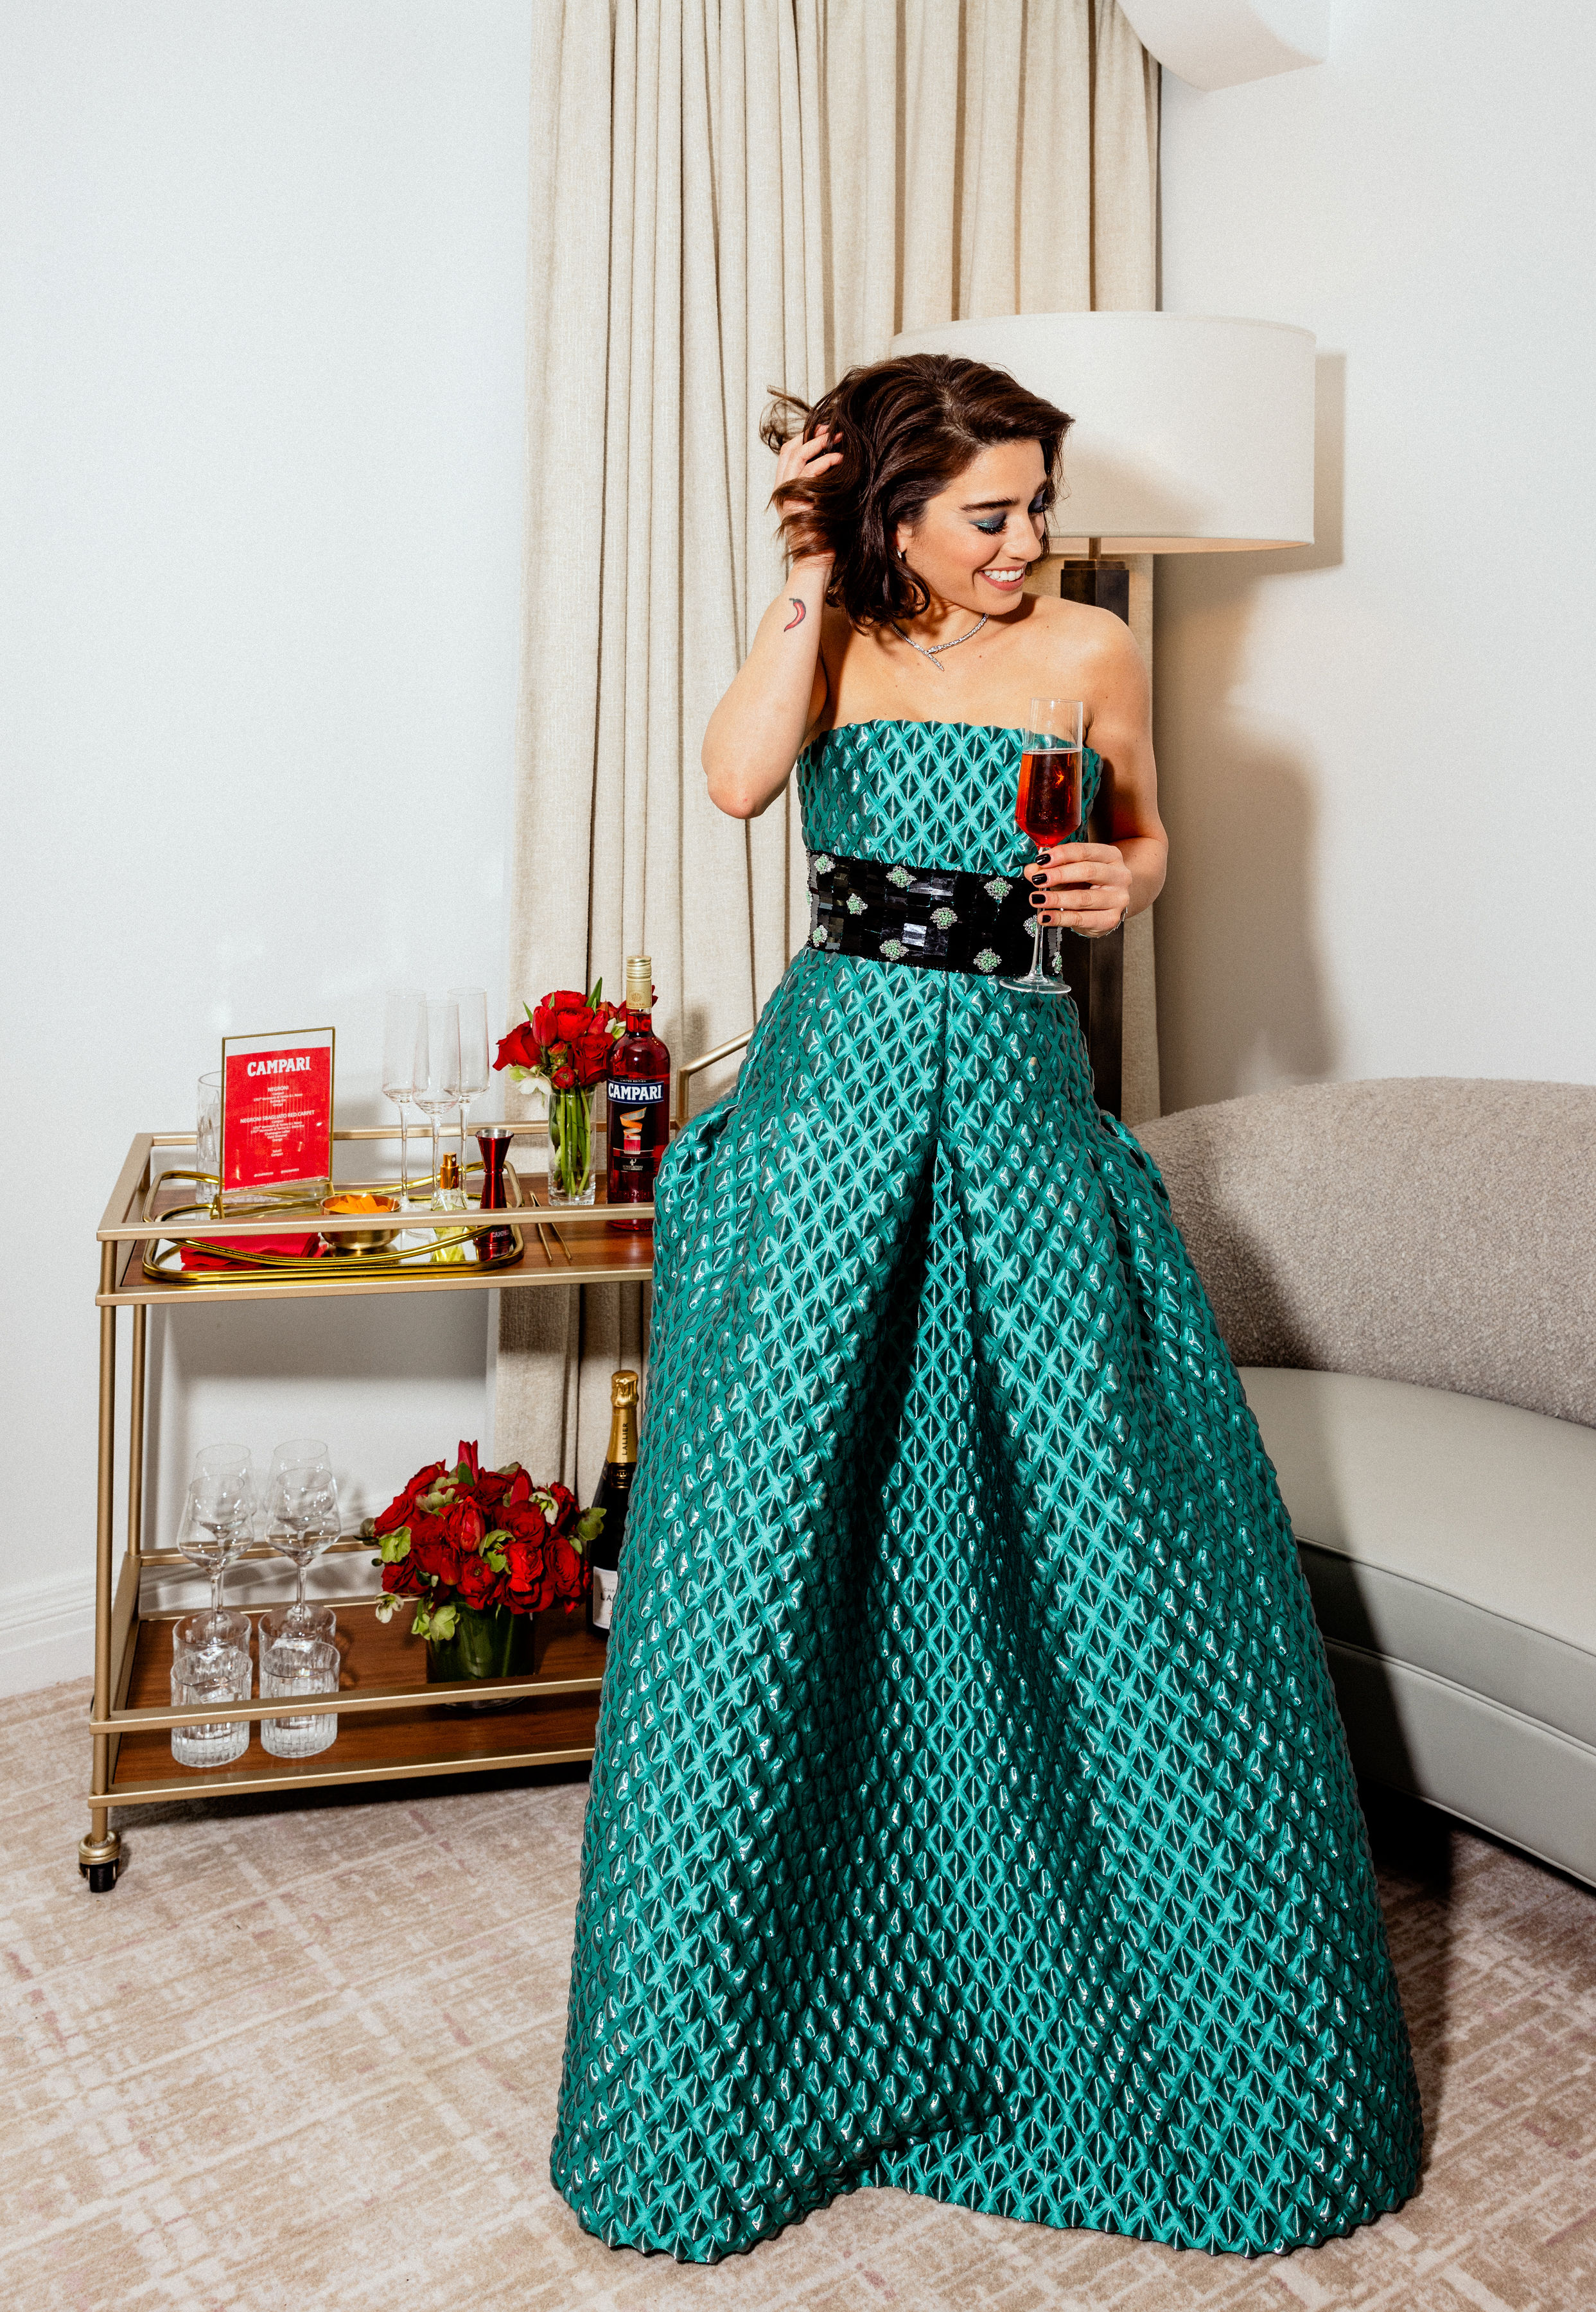 Simona Tabasco gets ready ahead of the 29th Screen Actors Guild Awards with Official Spirits Partner Campari.